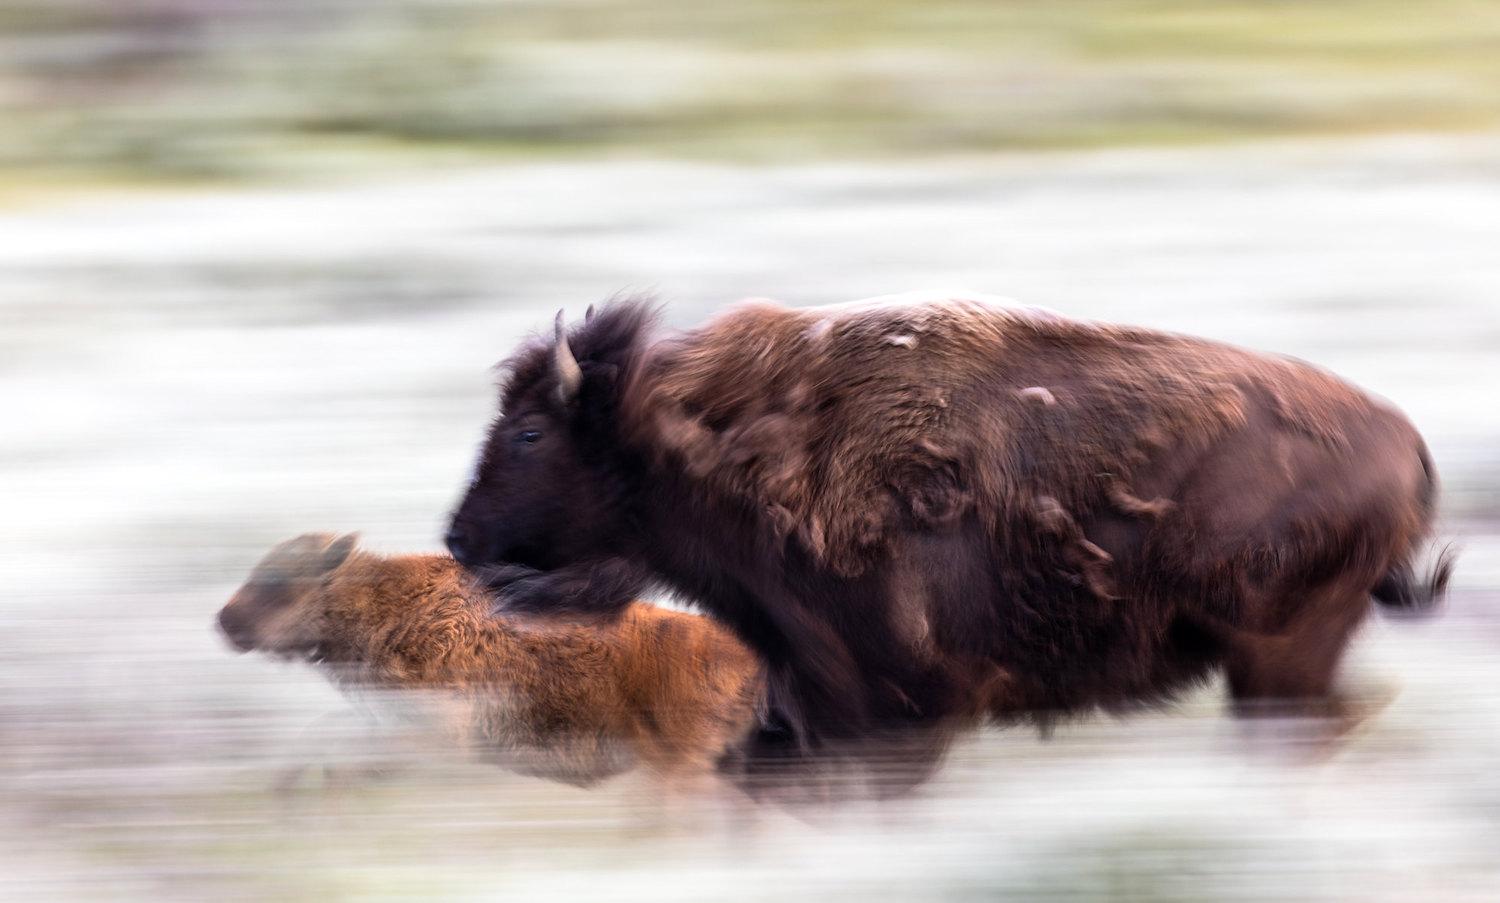 Bison cow and calf running in Yellowstone National Park/NPS file, Jacob W. Frank